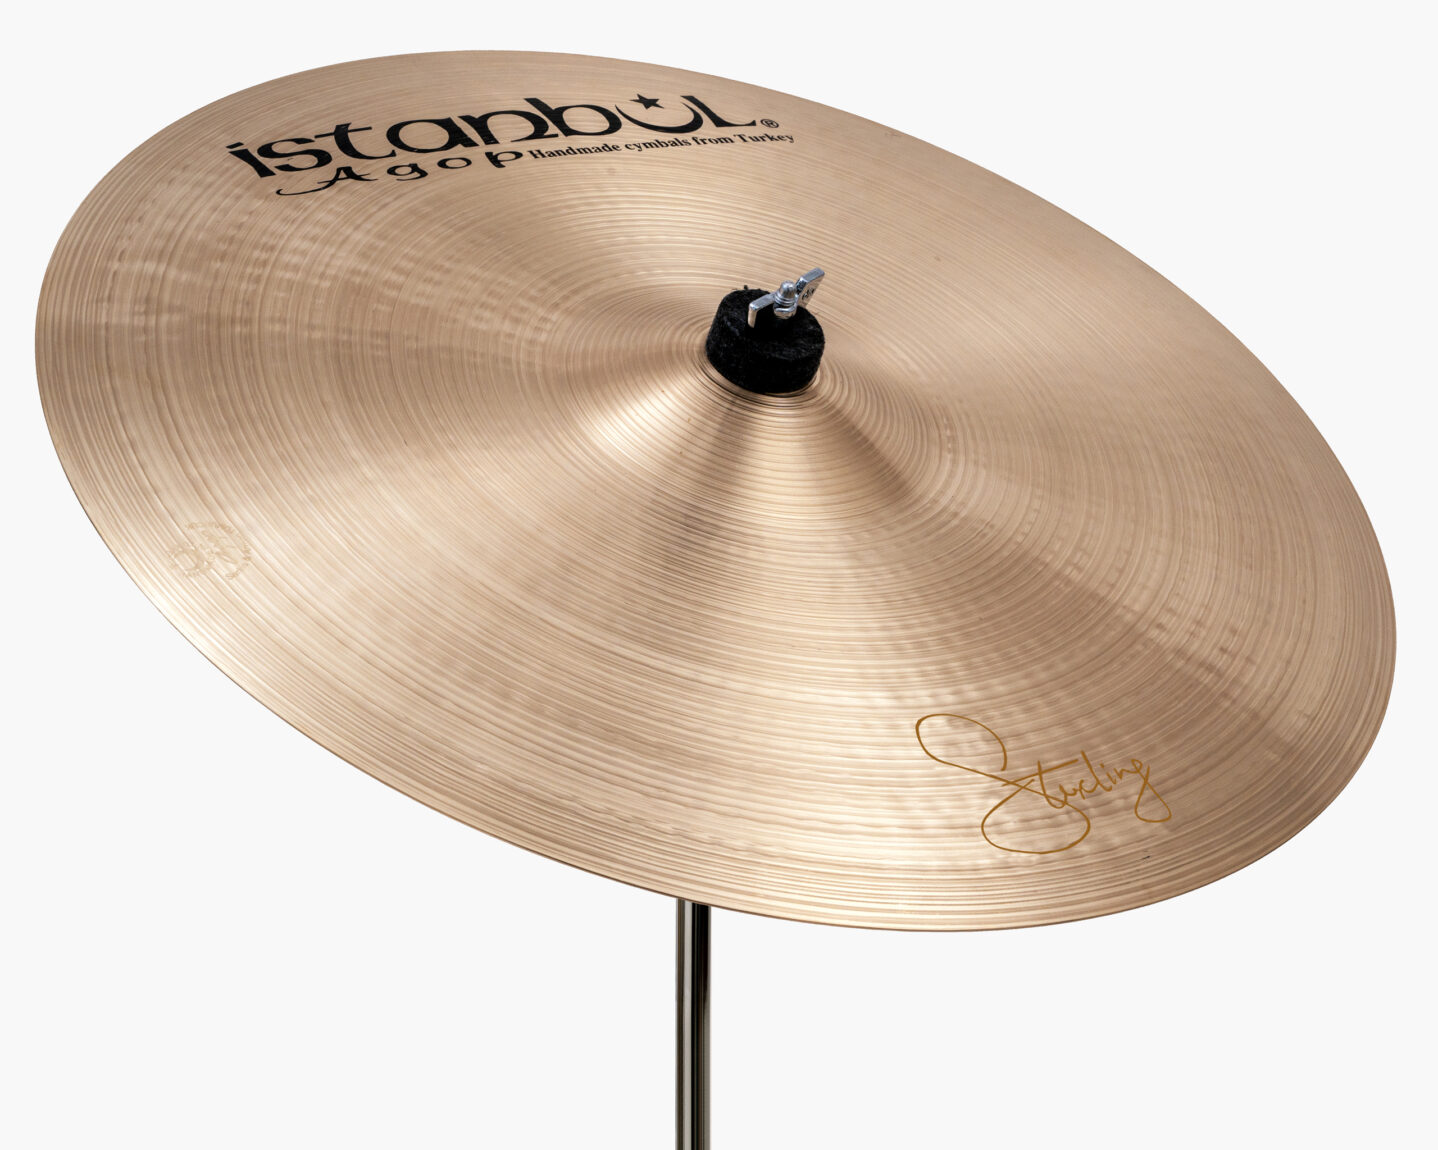 Istanbul Agop 20 Sterling Ride